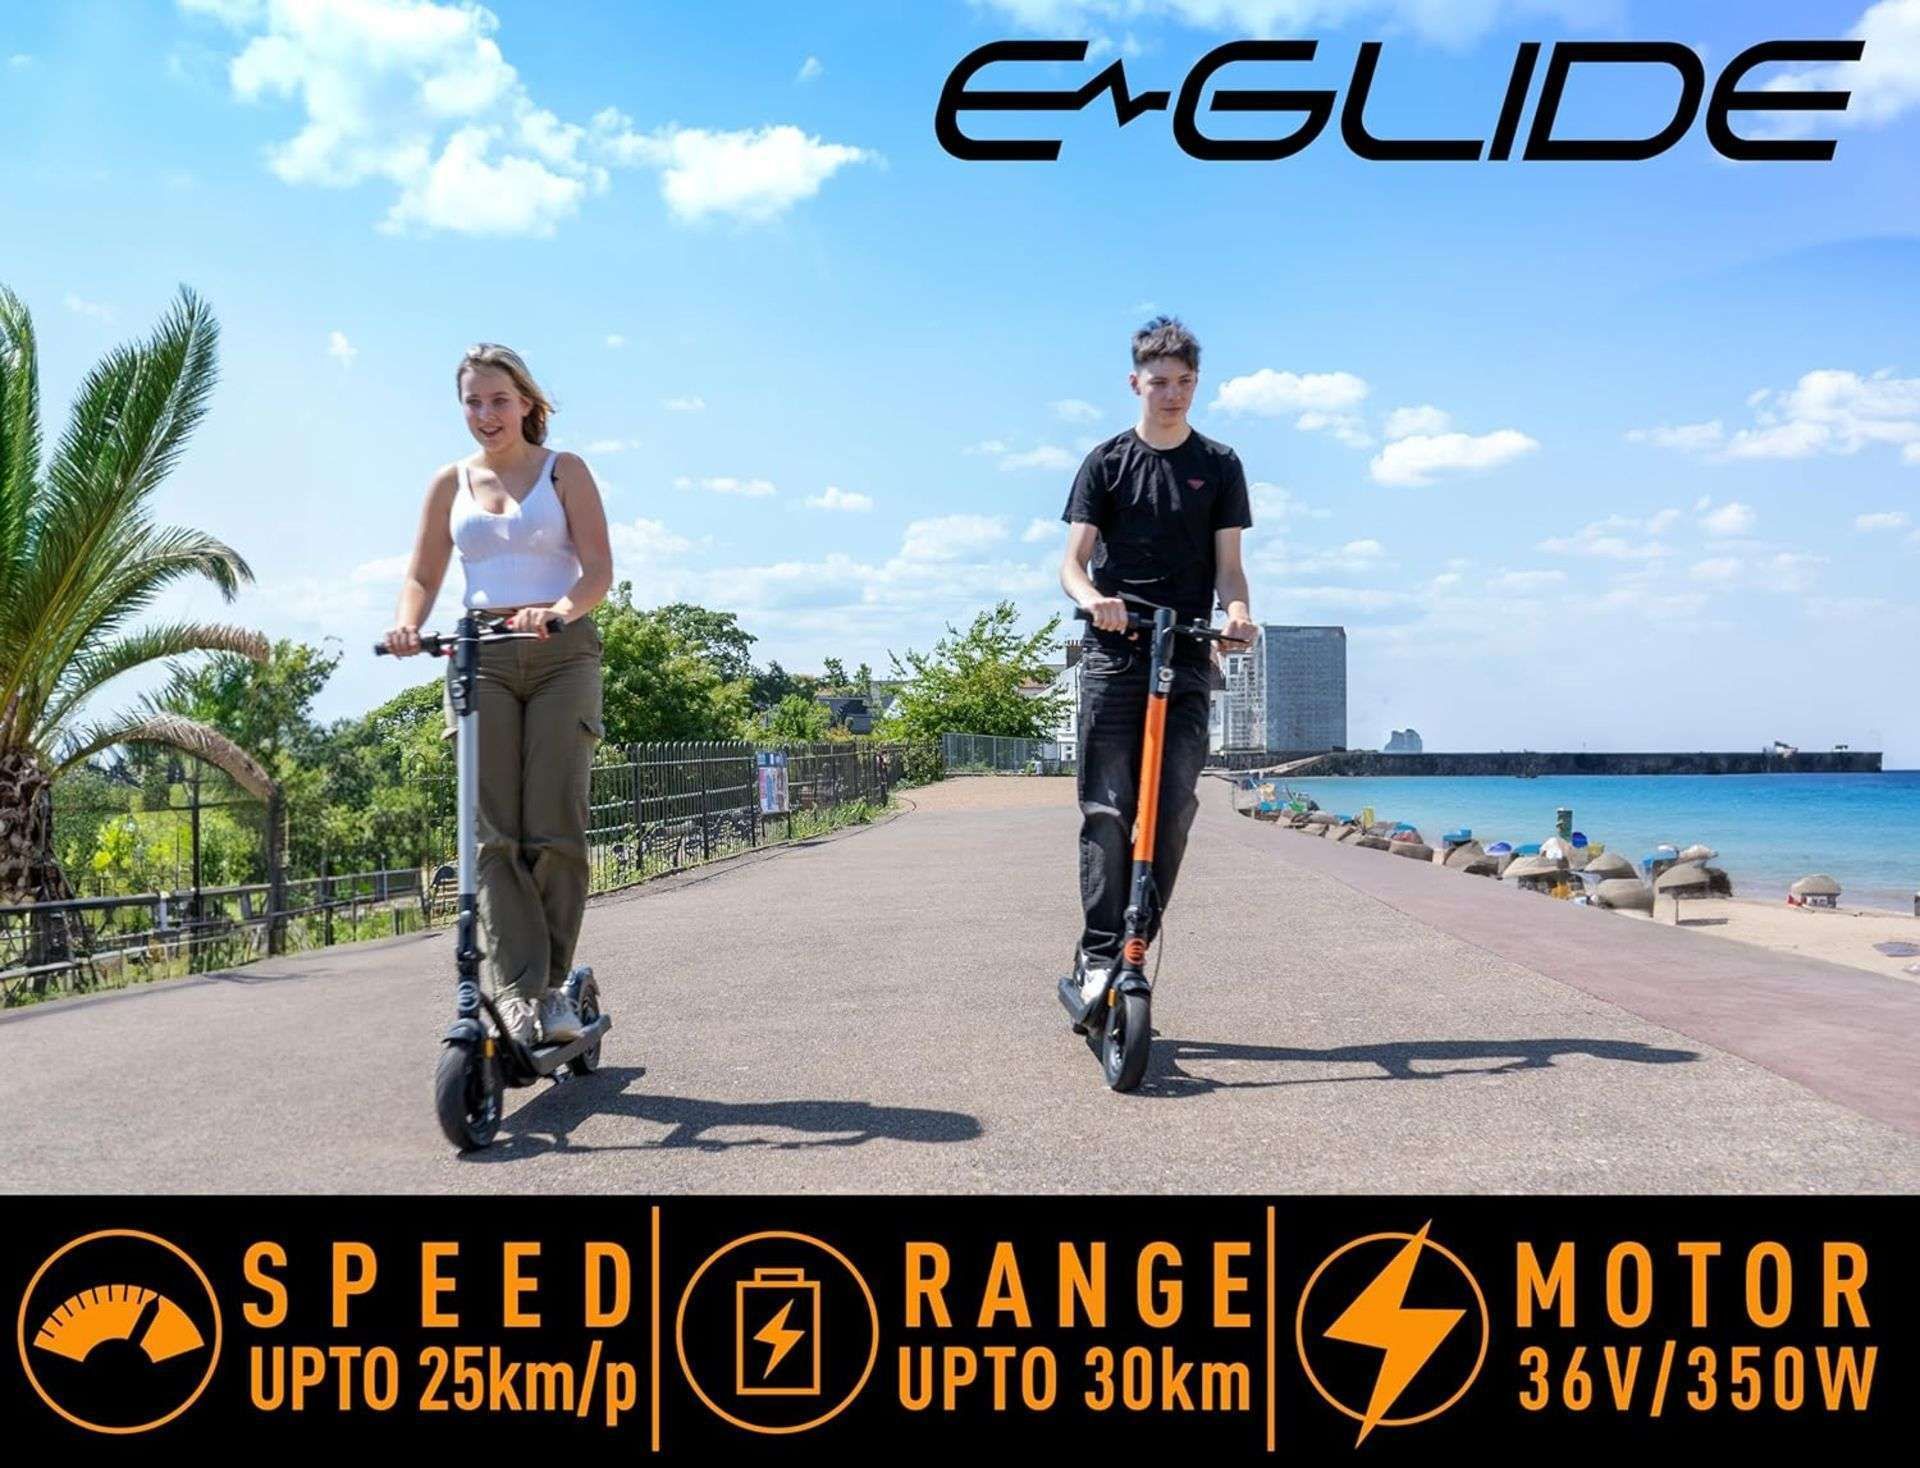 Brand New E-Glide V2 Electric Scooter Orange and Black RRP £599, Introducing a sleek and efficient - Bild 3 aus 5